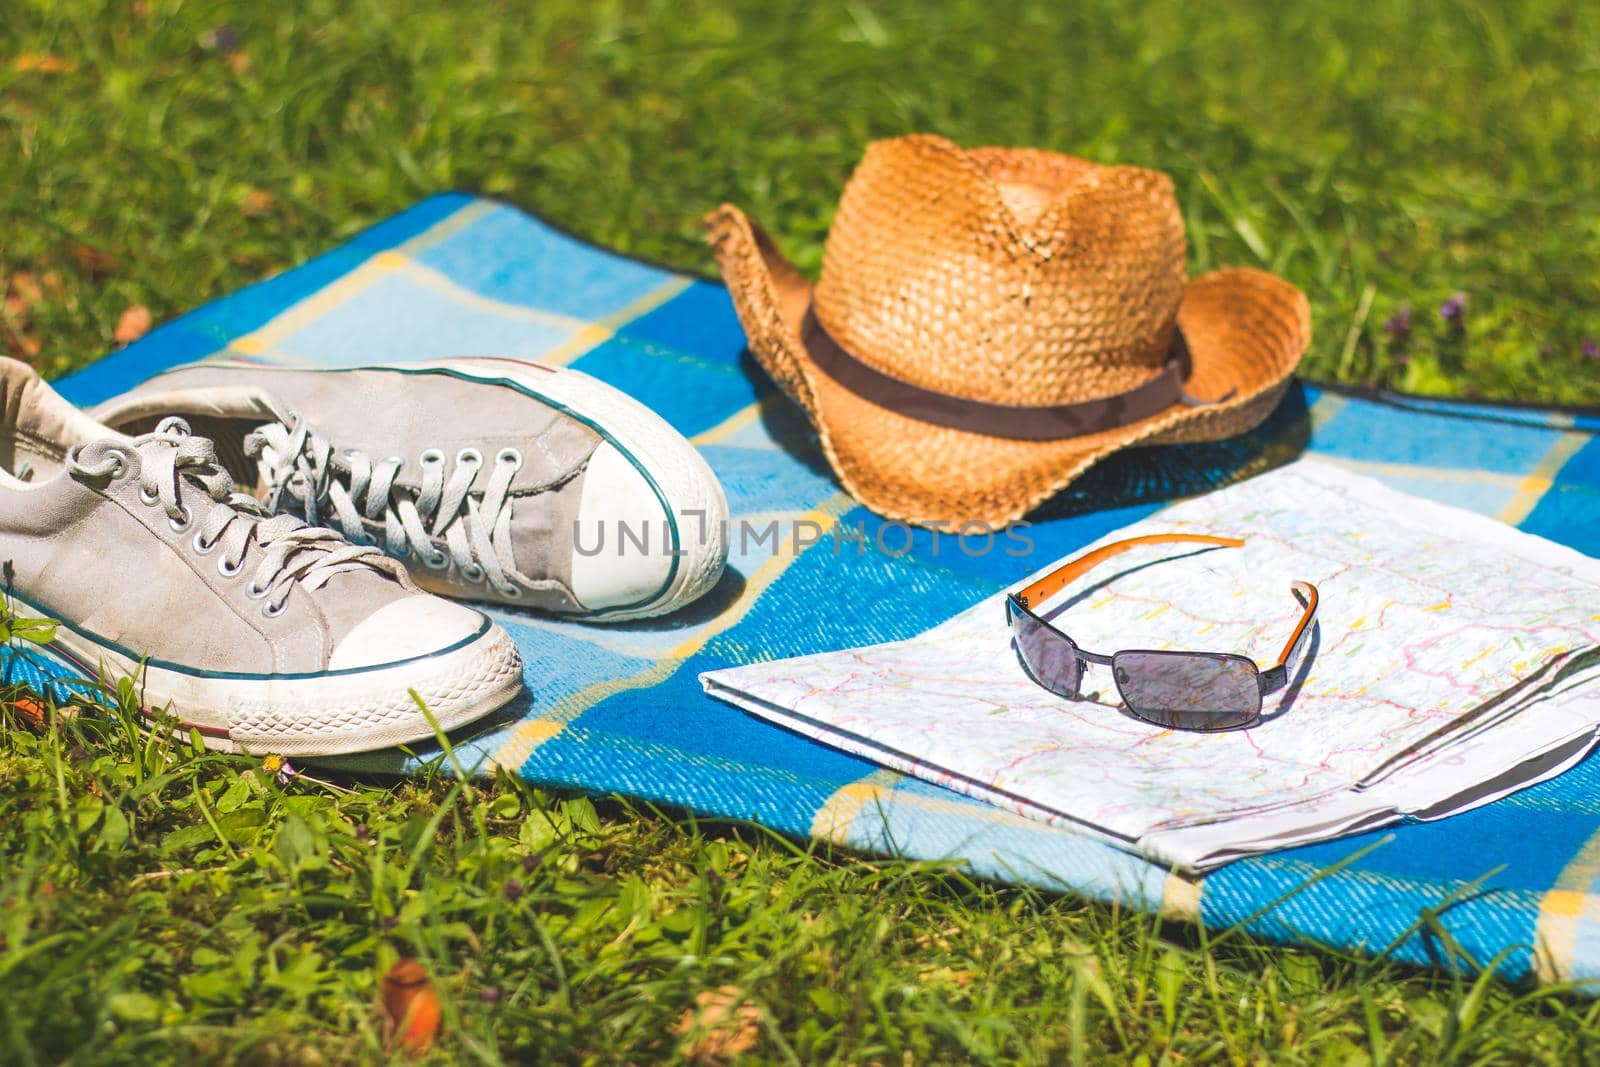 Picnic blanket with sneakers, straw hat, map and radio